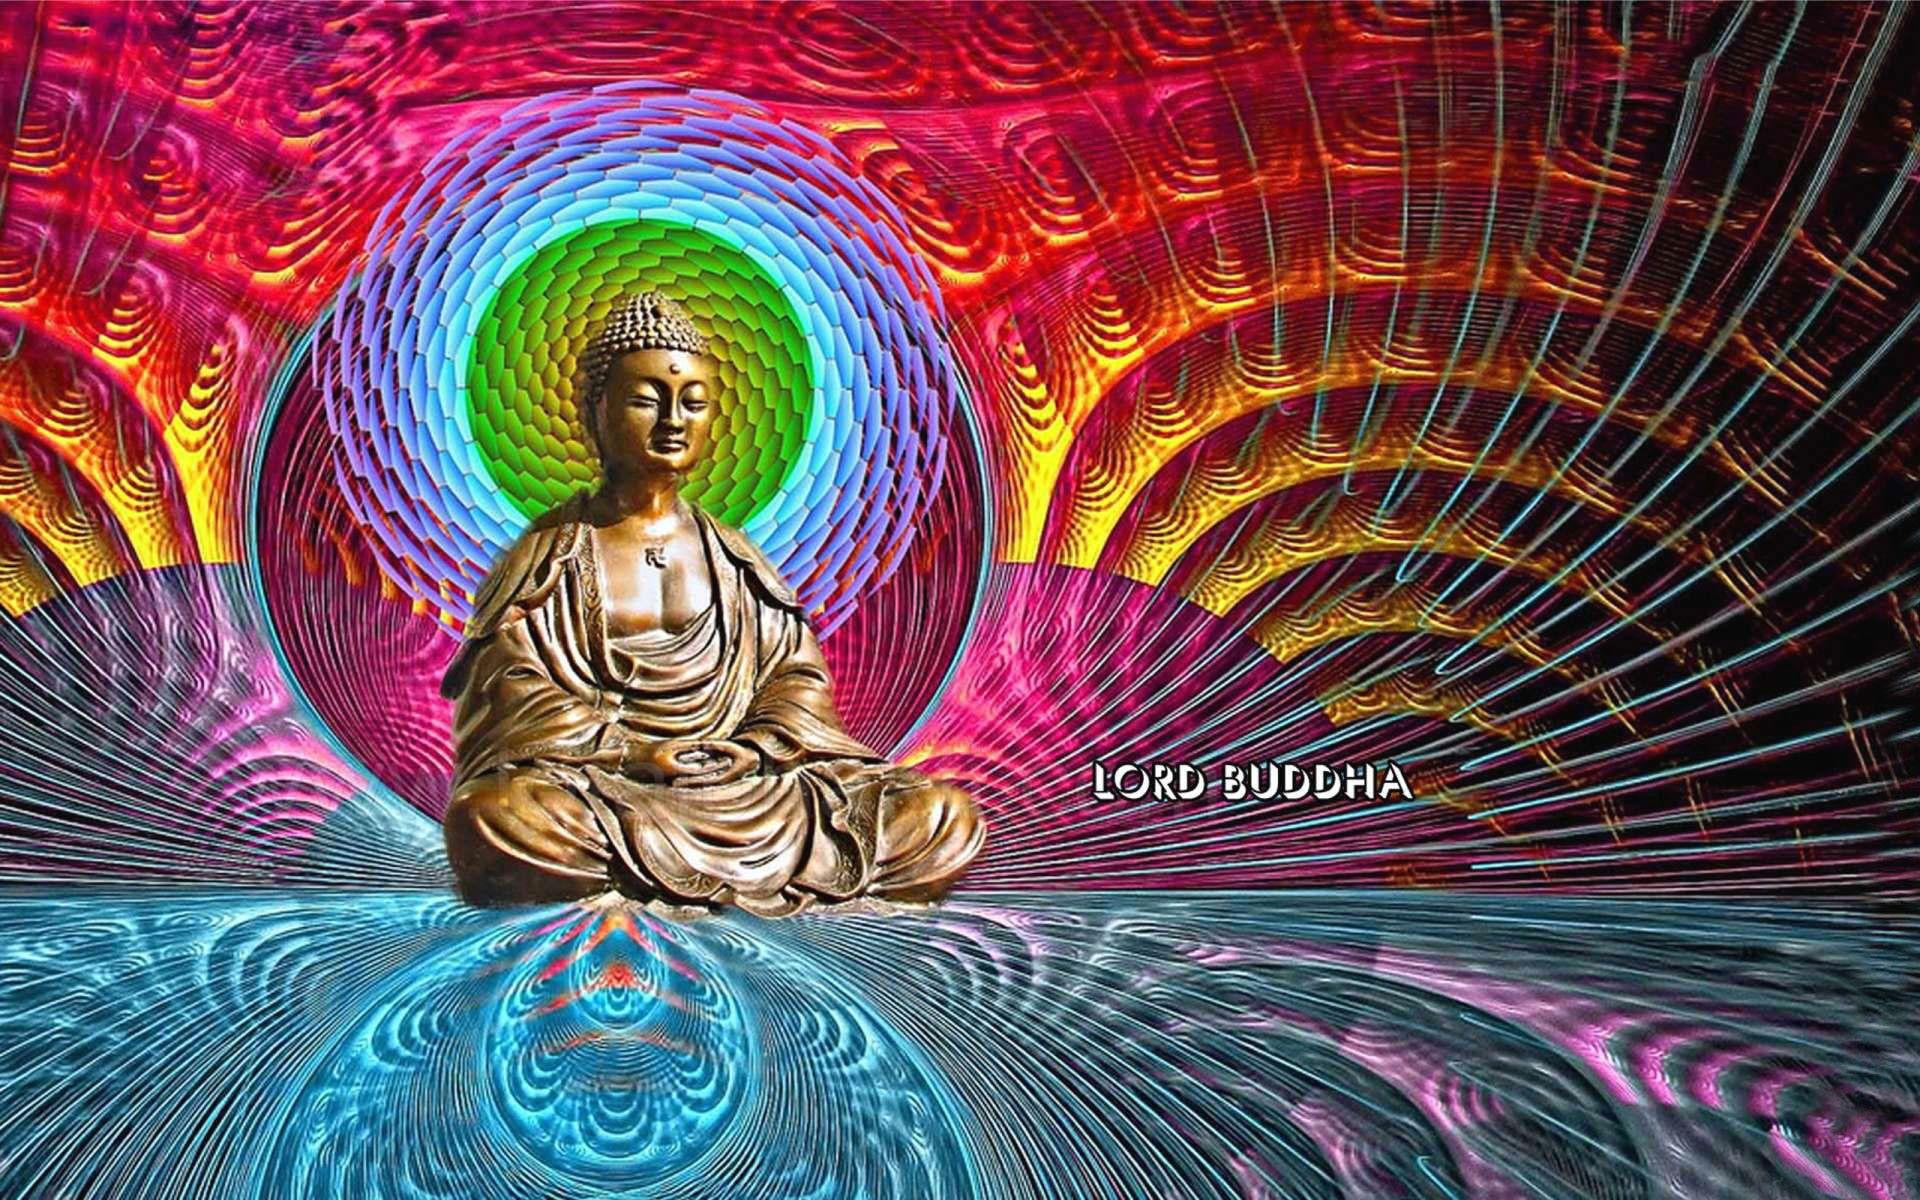 Gautam Buddha Wallpapers Image Free Download Exceptional Lord.